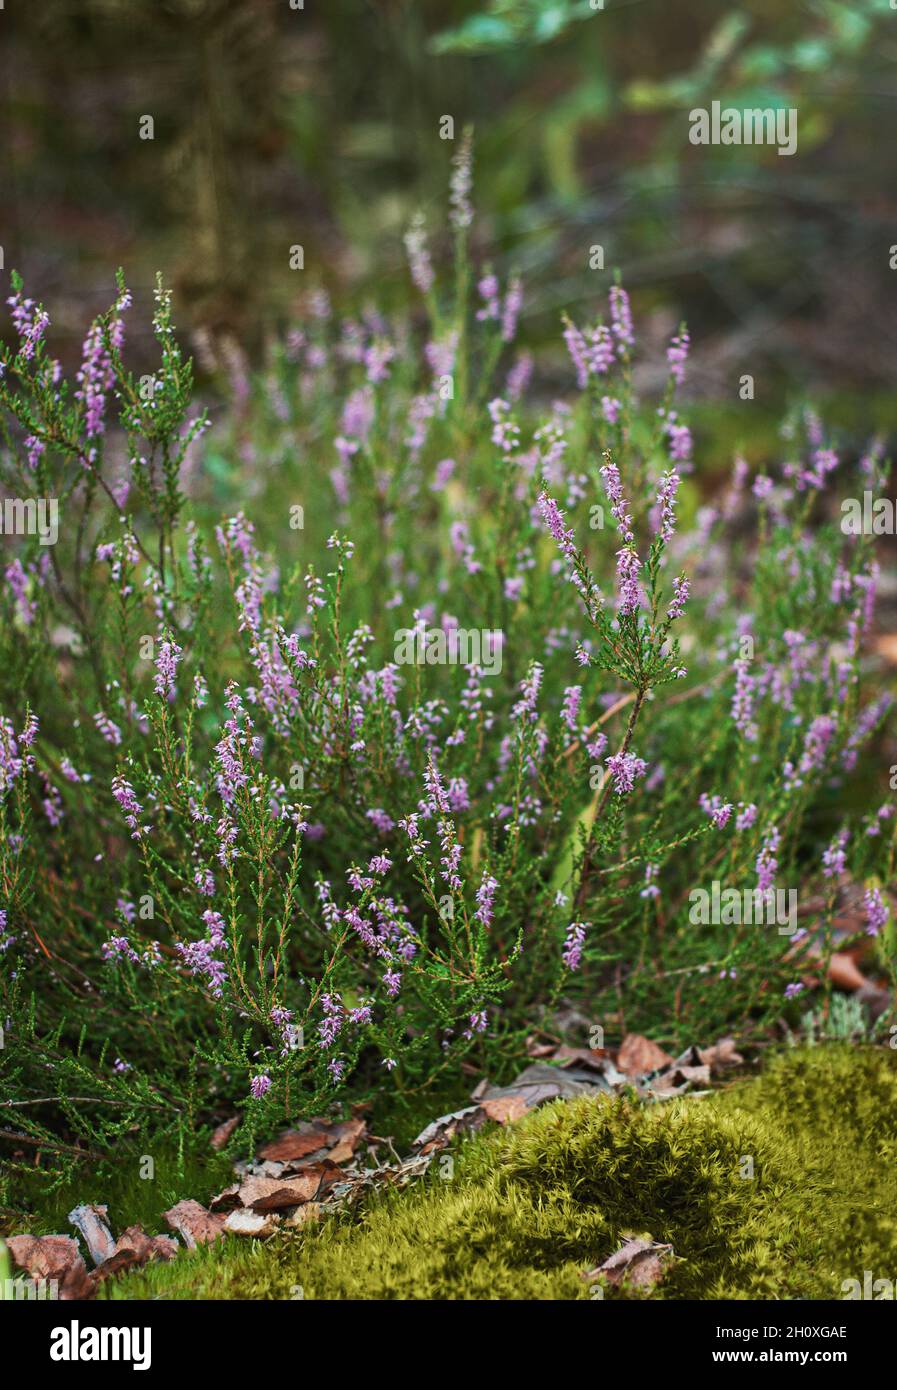 Forest heather, bush of lilac flowers, delicate, beautiful inflorescences Stock Photo